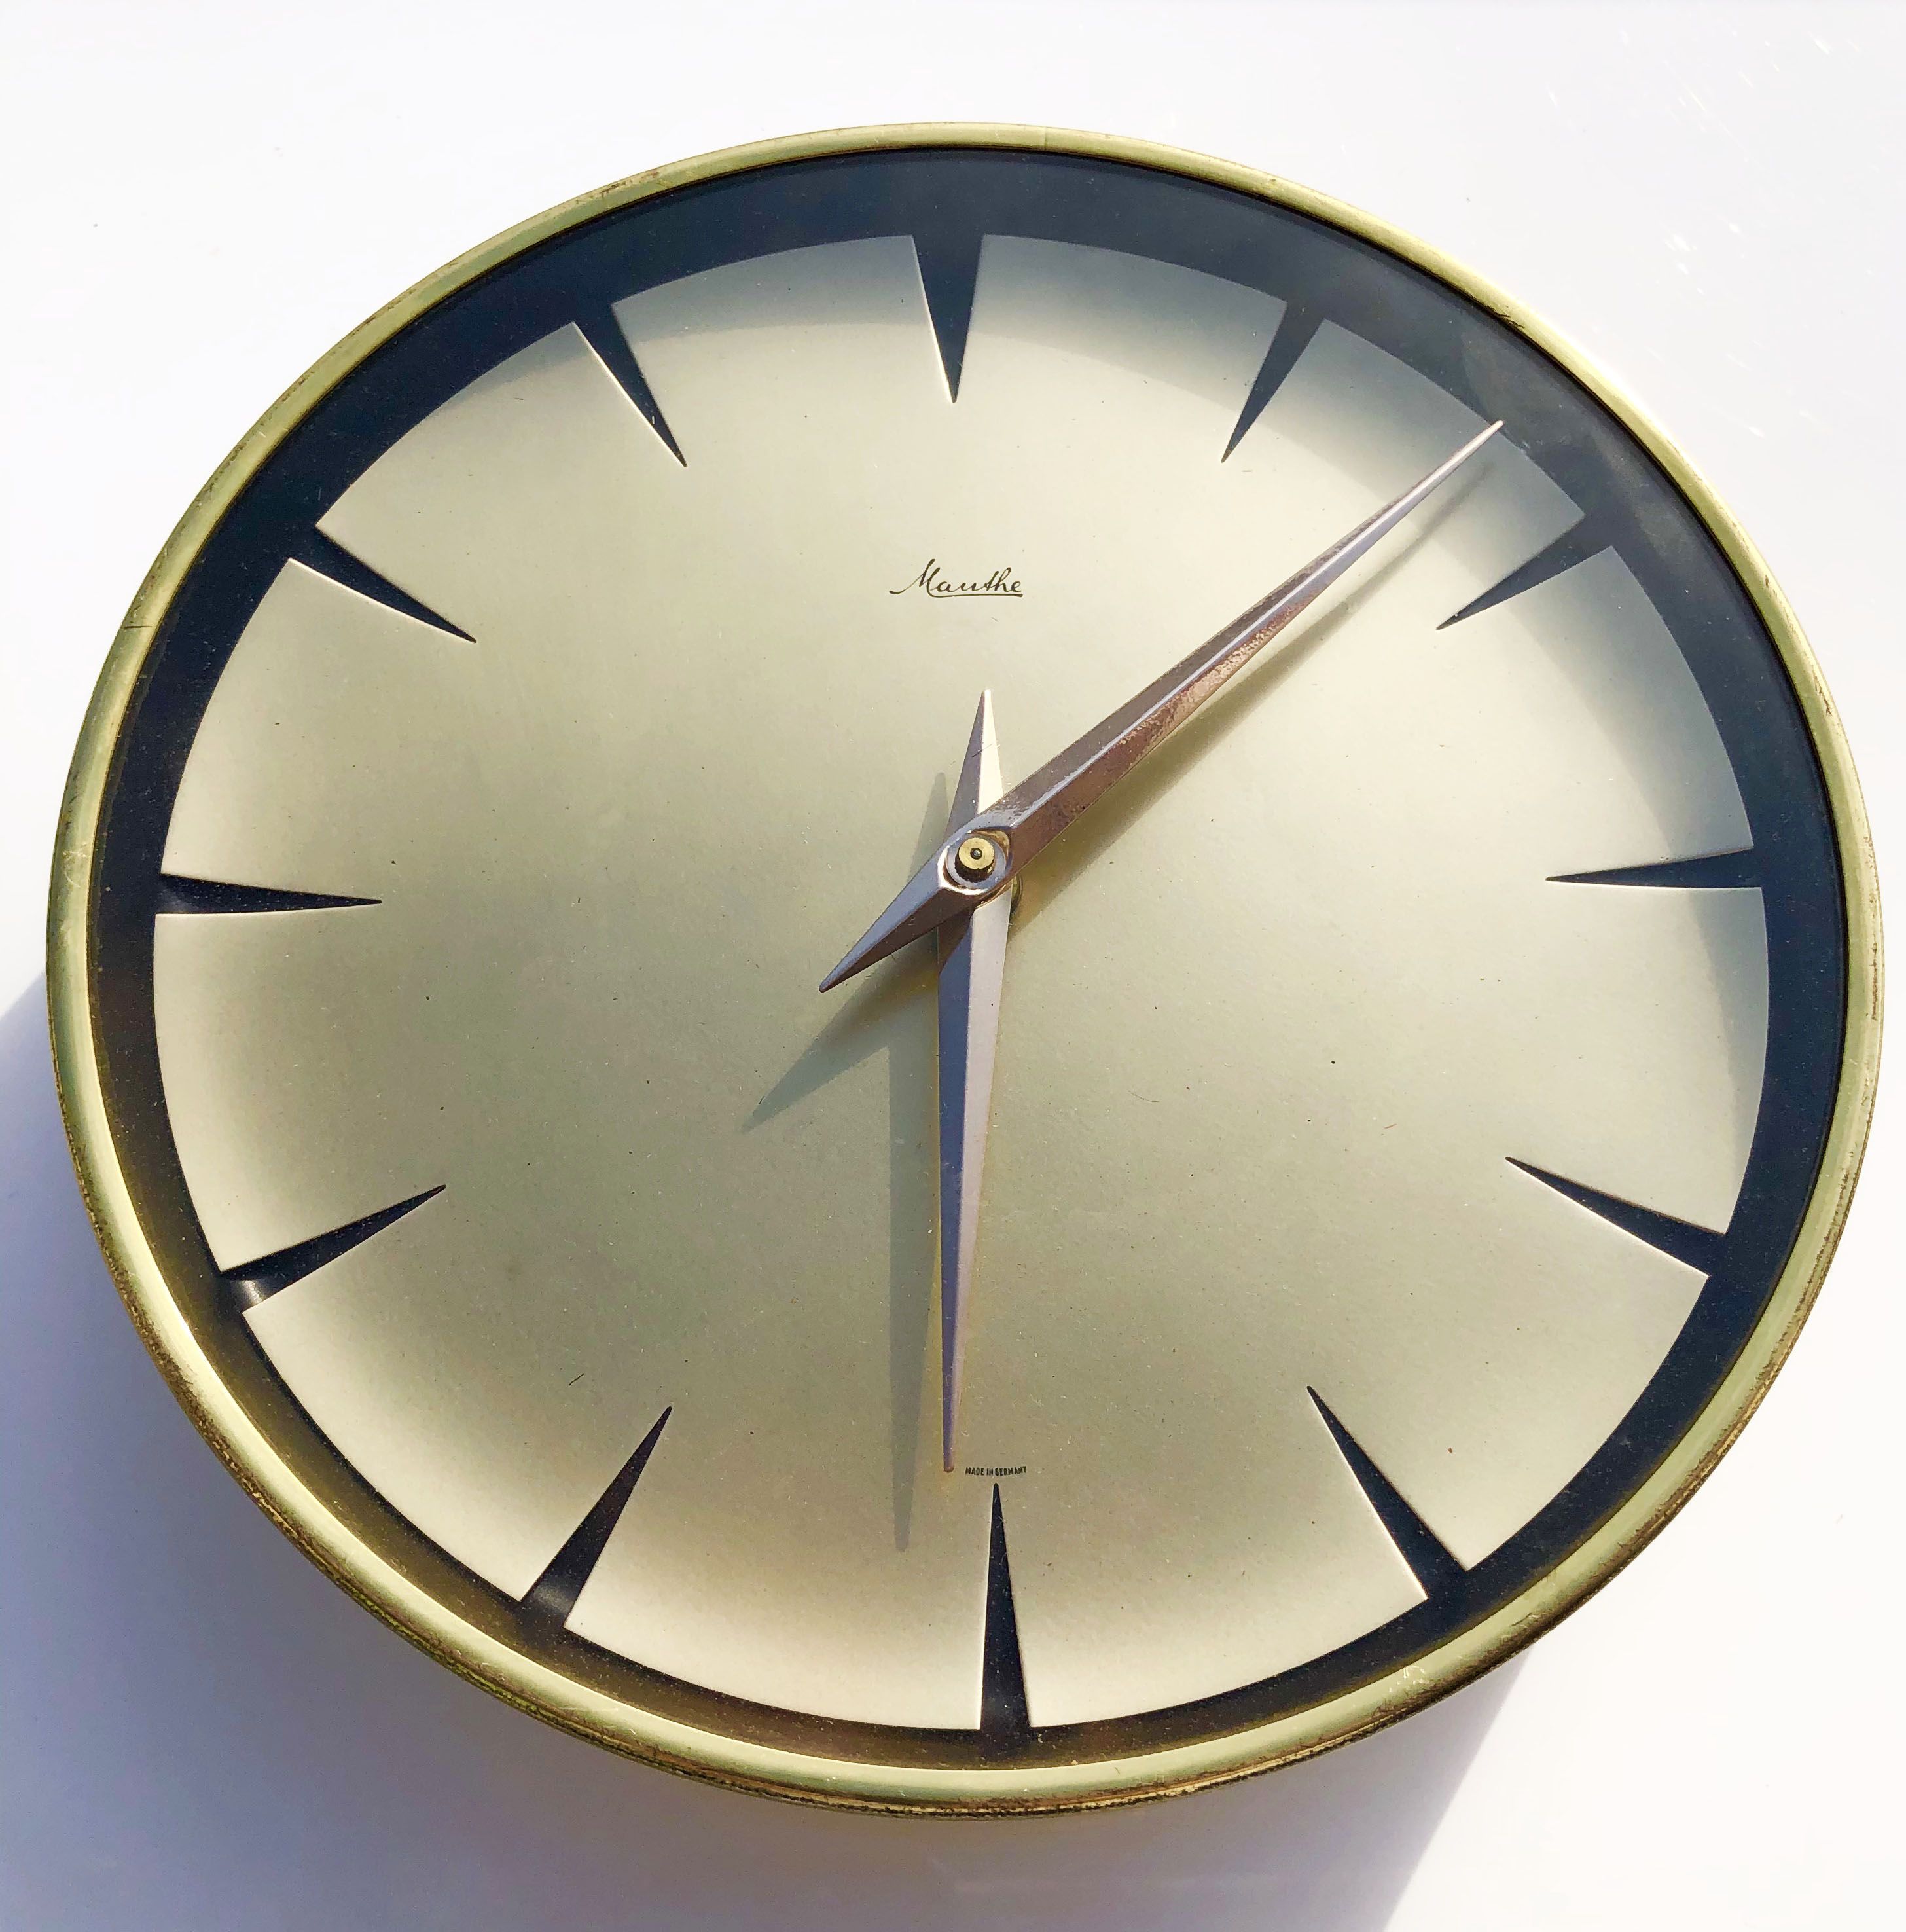 Vintage wall clock solid brass Mauthe. Germany 1970s - Design Market